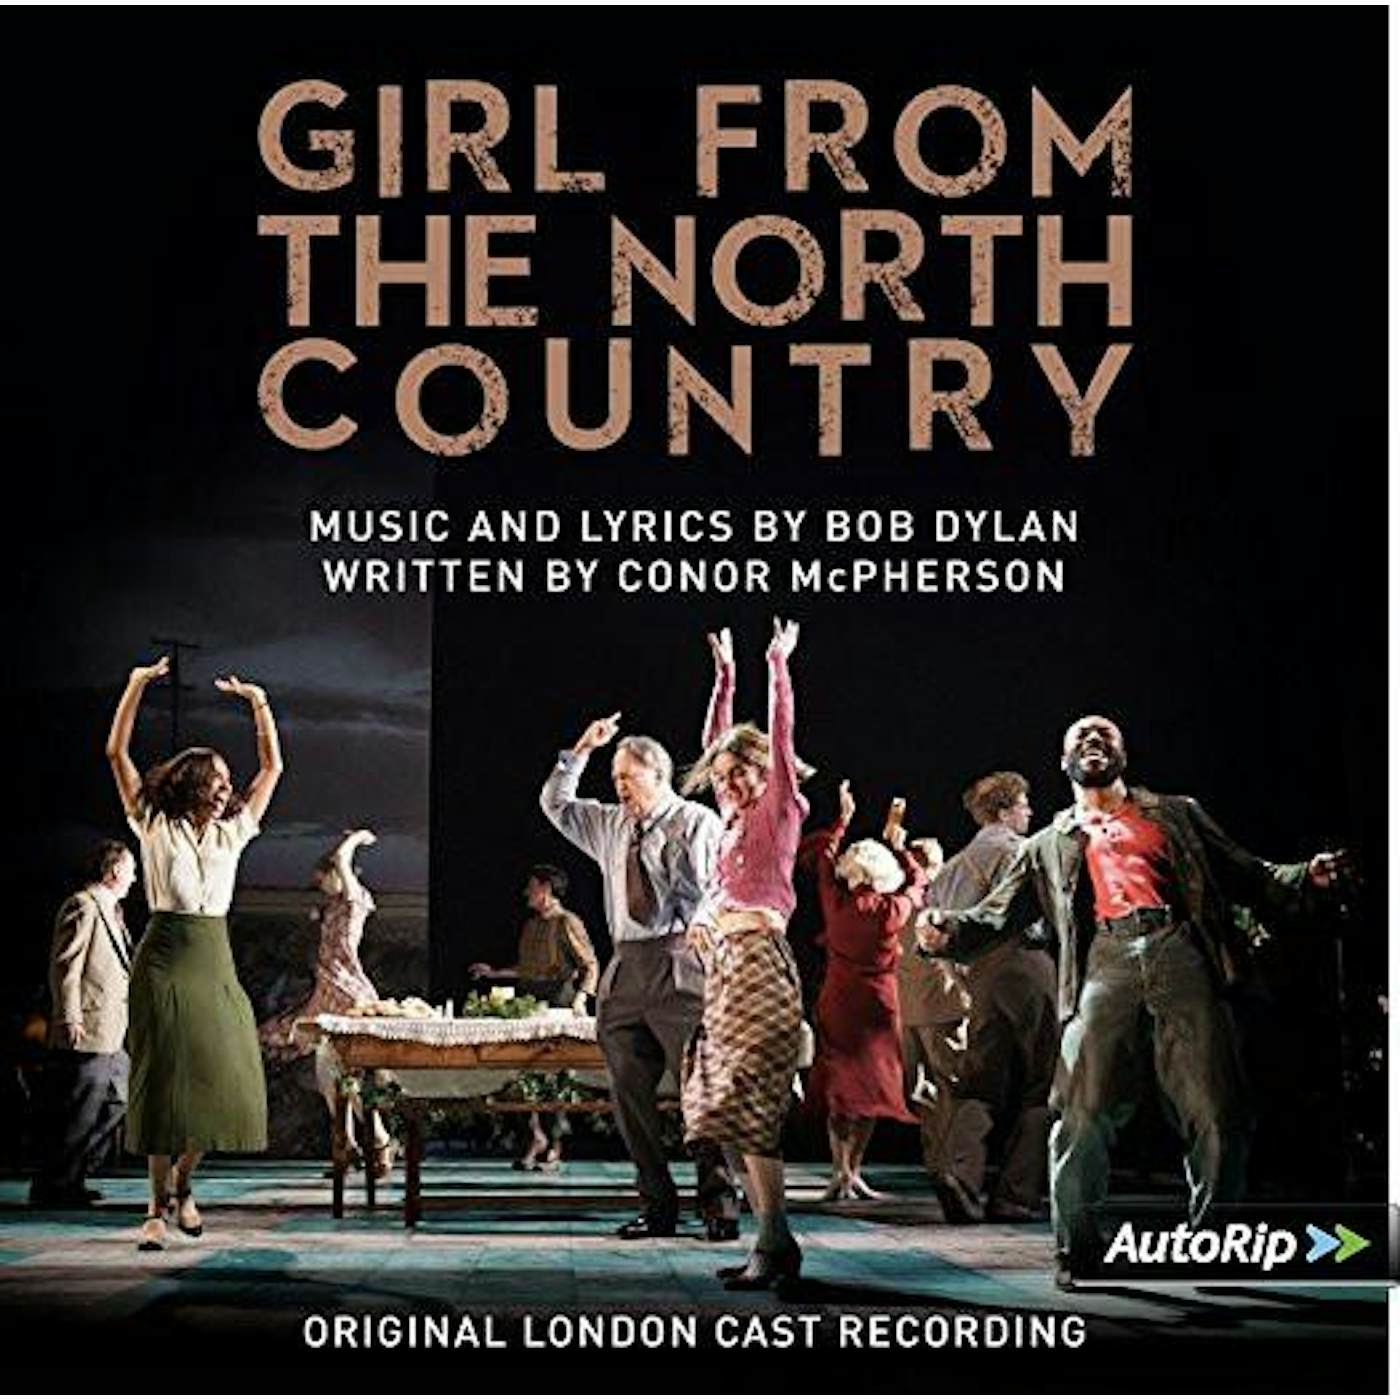 GIRL FROM THE NORTH COUNTRY (ORIGINAL LONDON CAST ) Vinyl Record